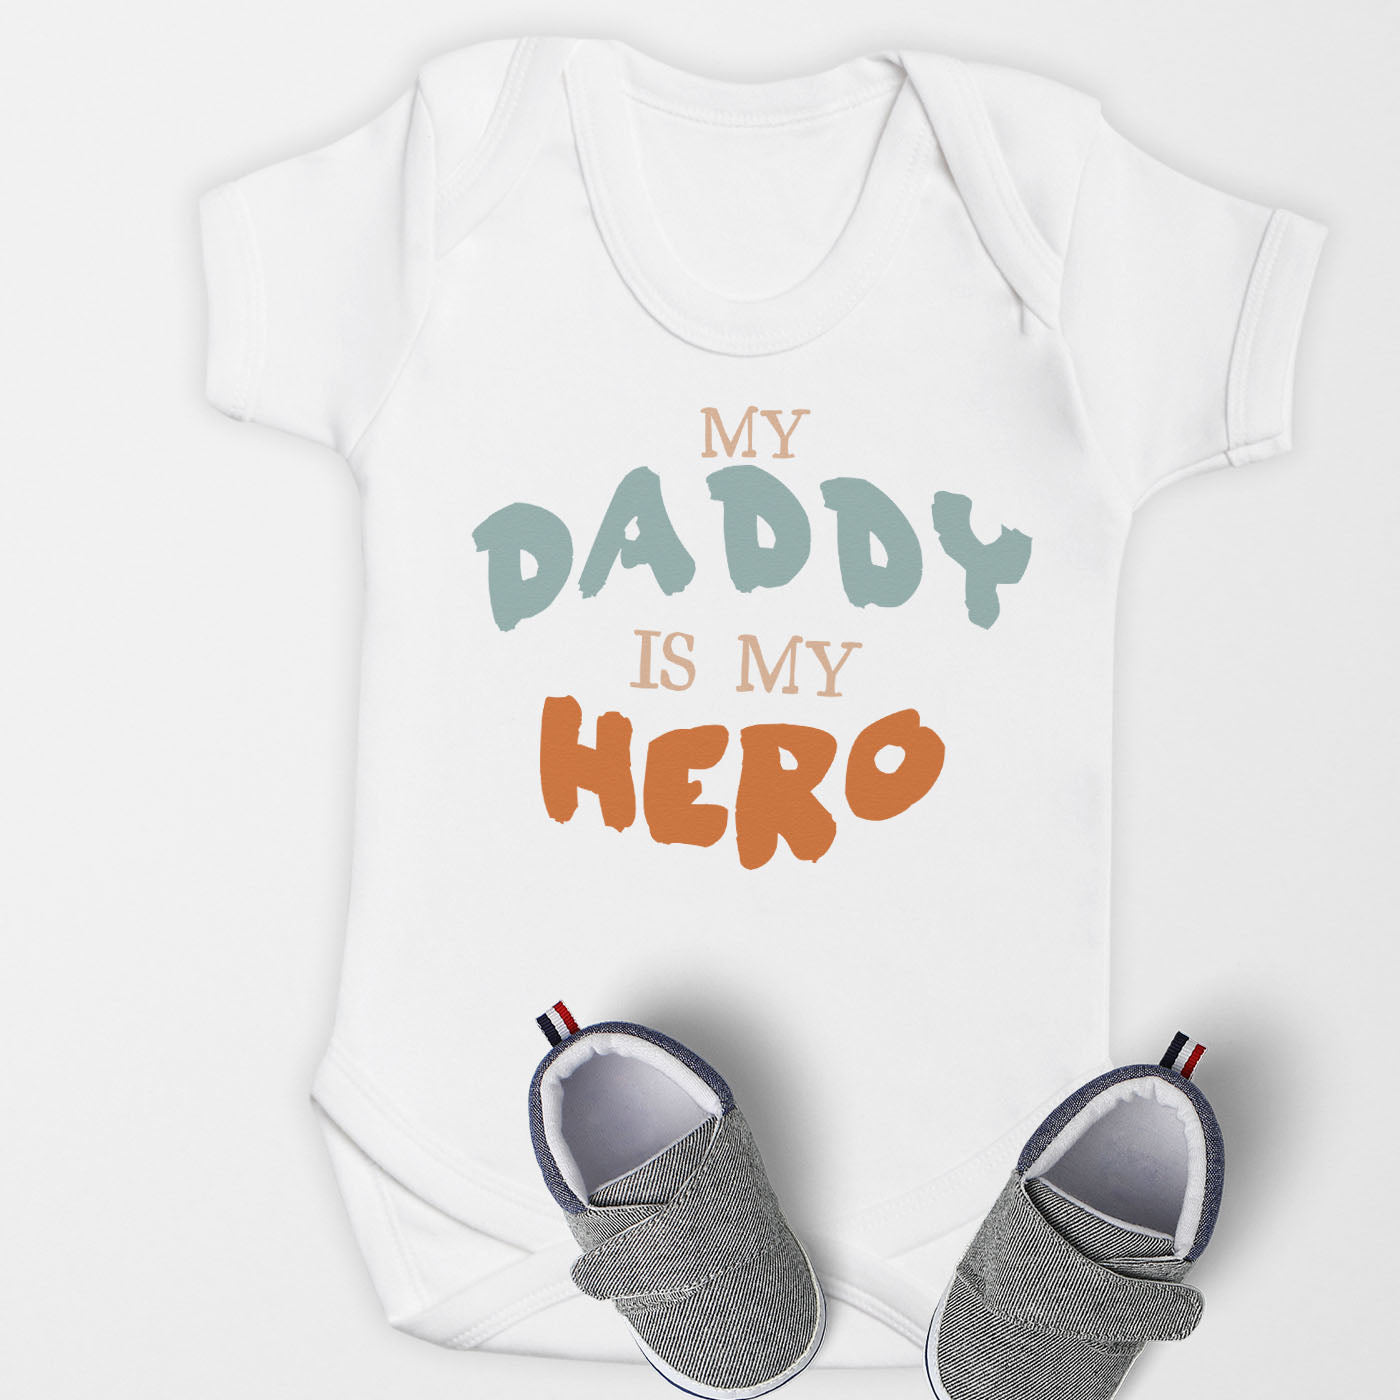 Pick A Family Name - Mummy, Auntie, Grandad and more My Hero - Baby Bodysuit